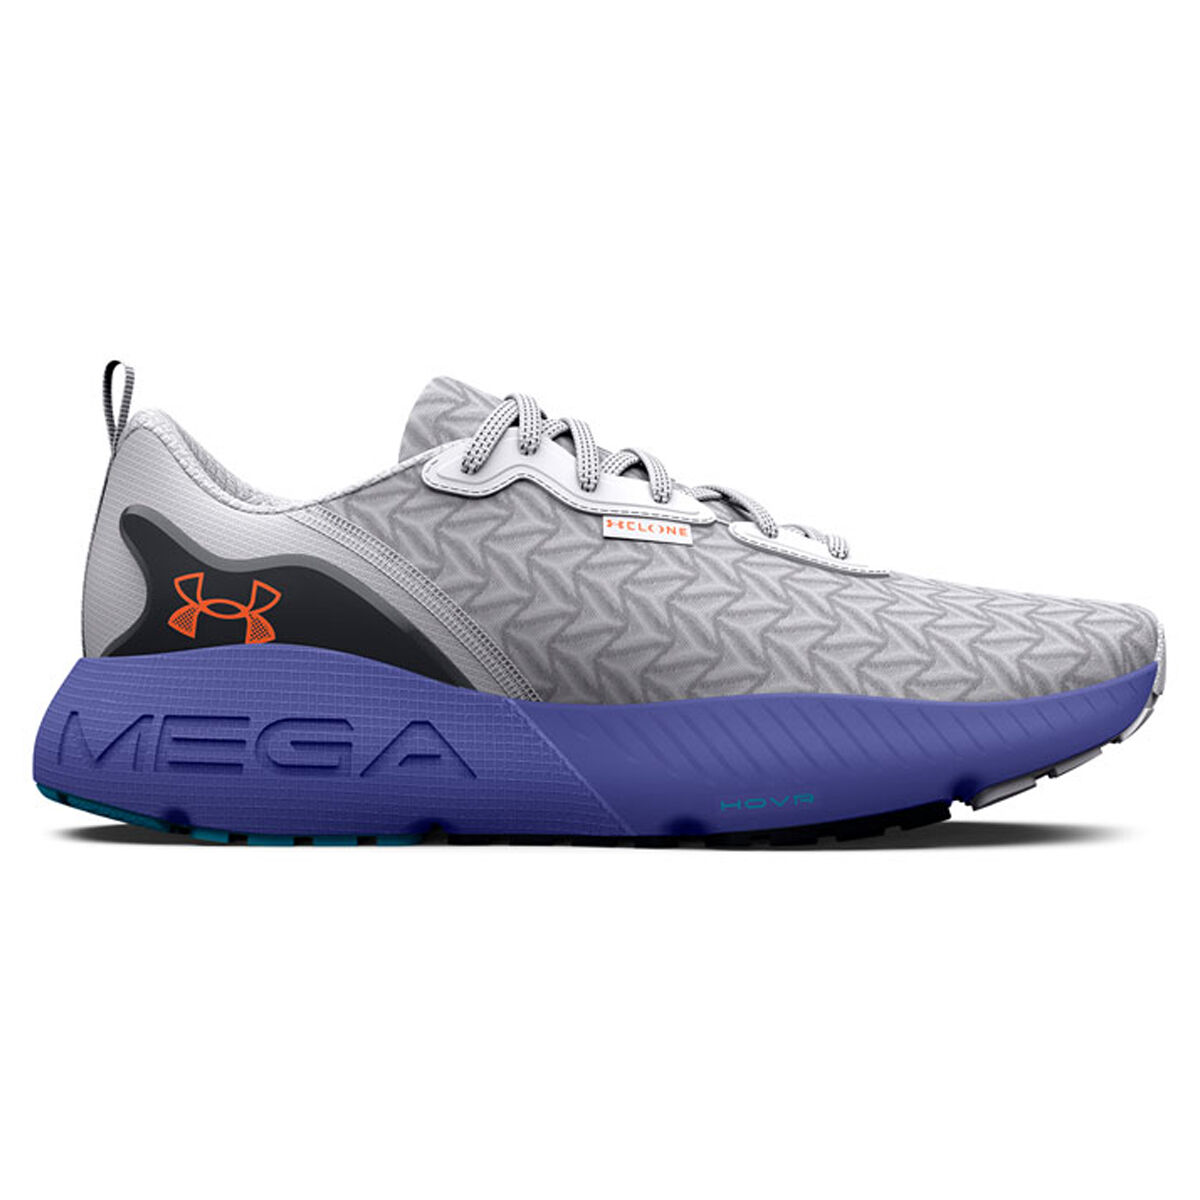 Under Armour HOVR Mega Clone 3 Womens Running Shoes | Rebel Sport